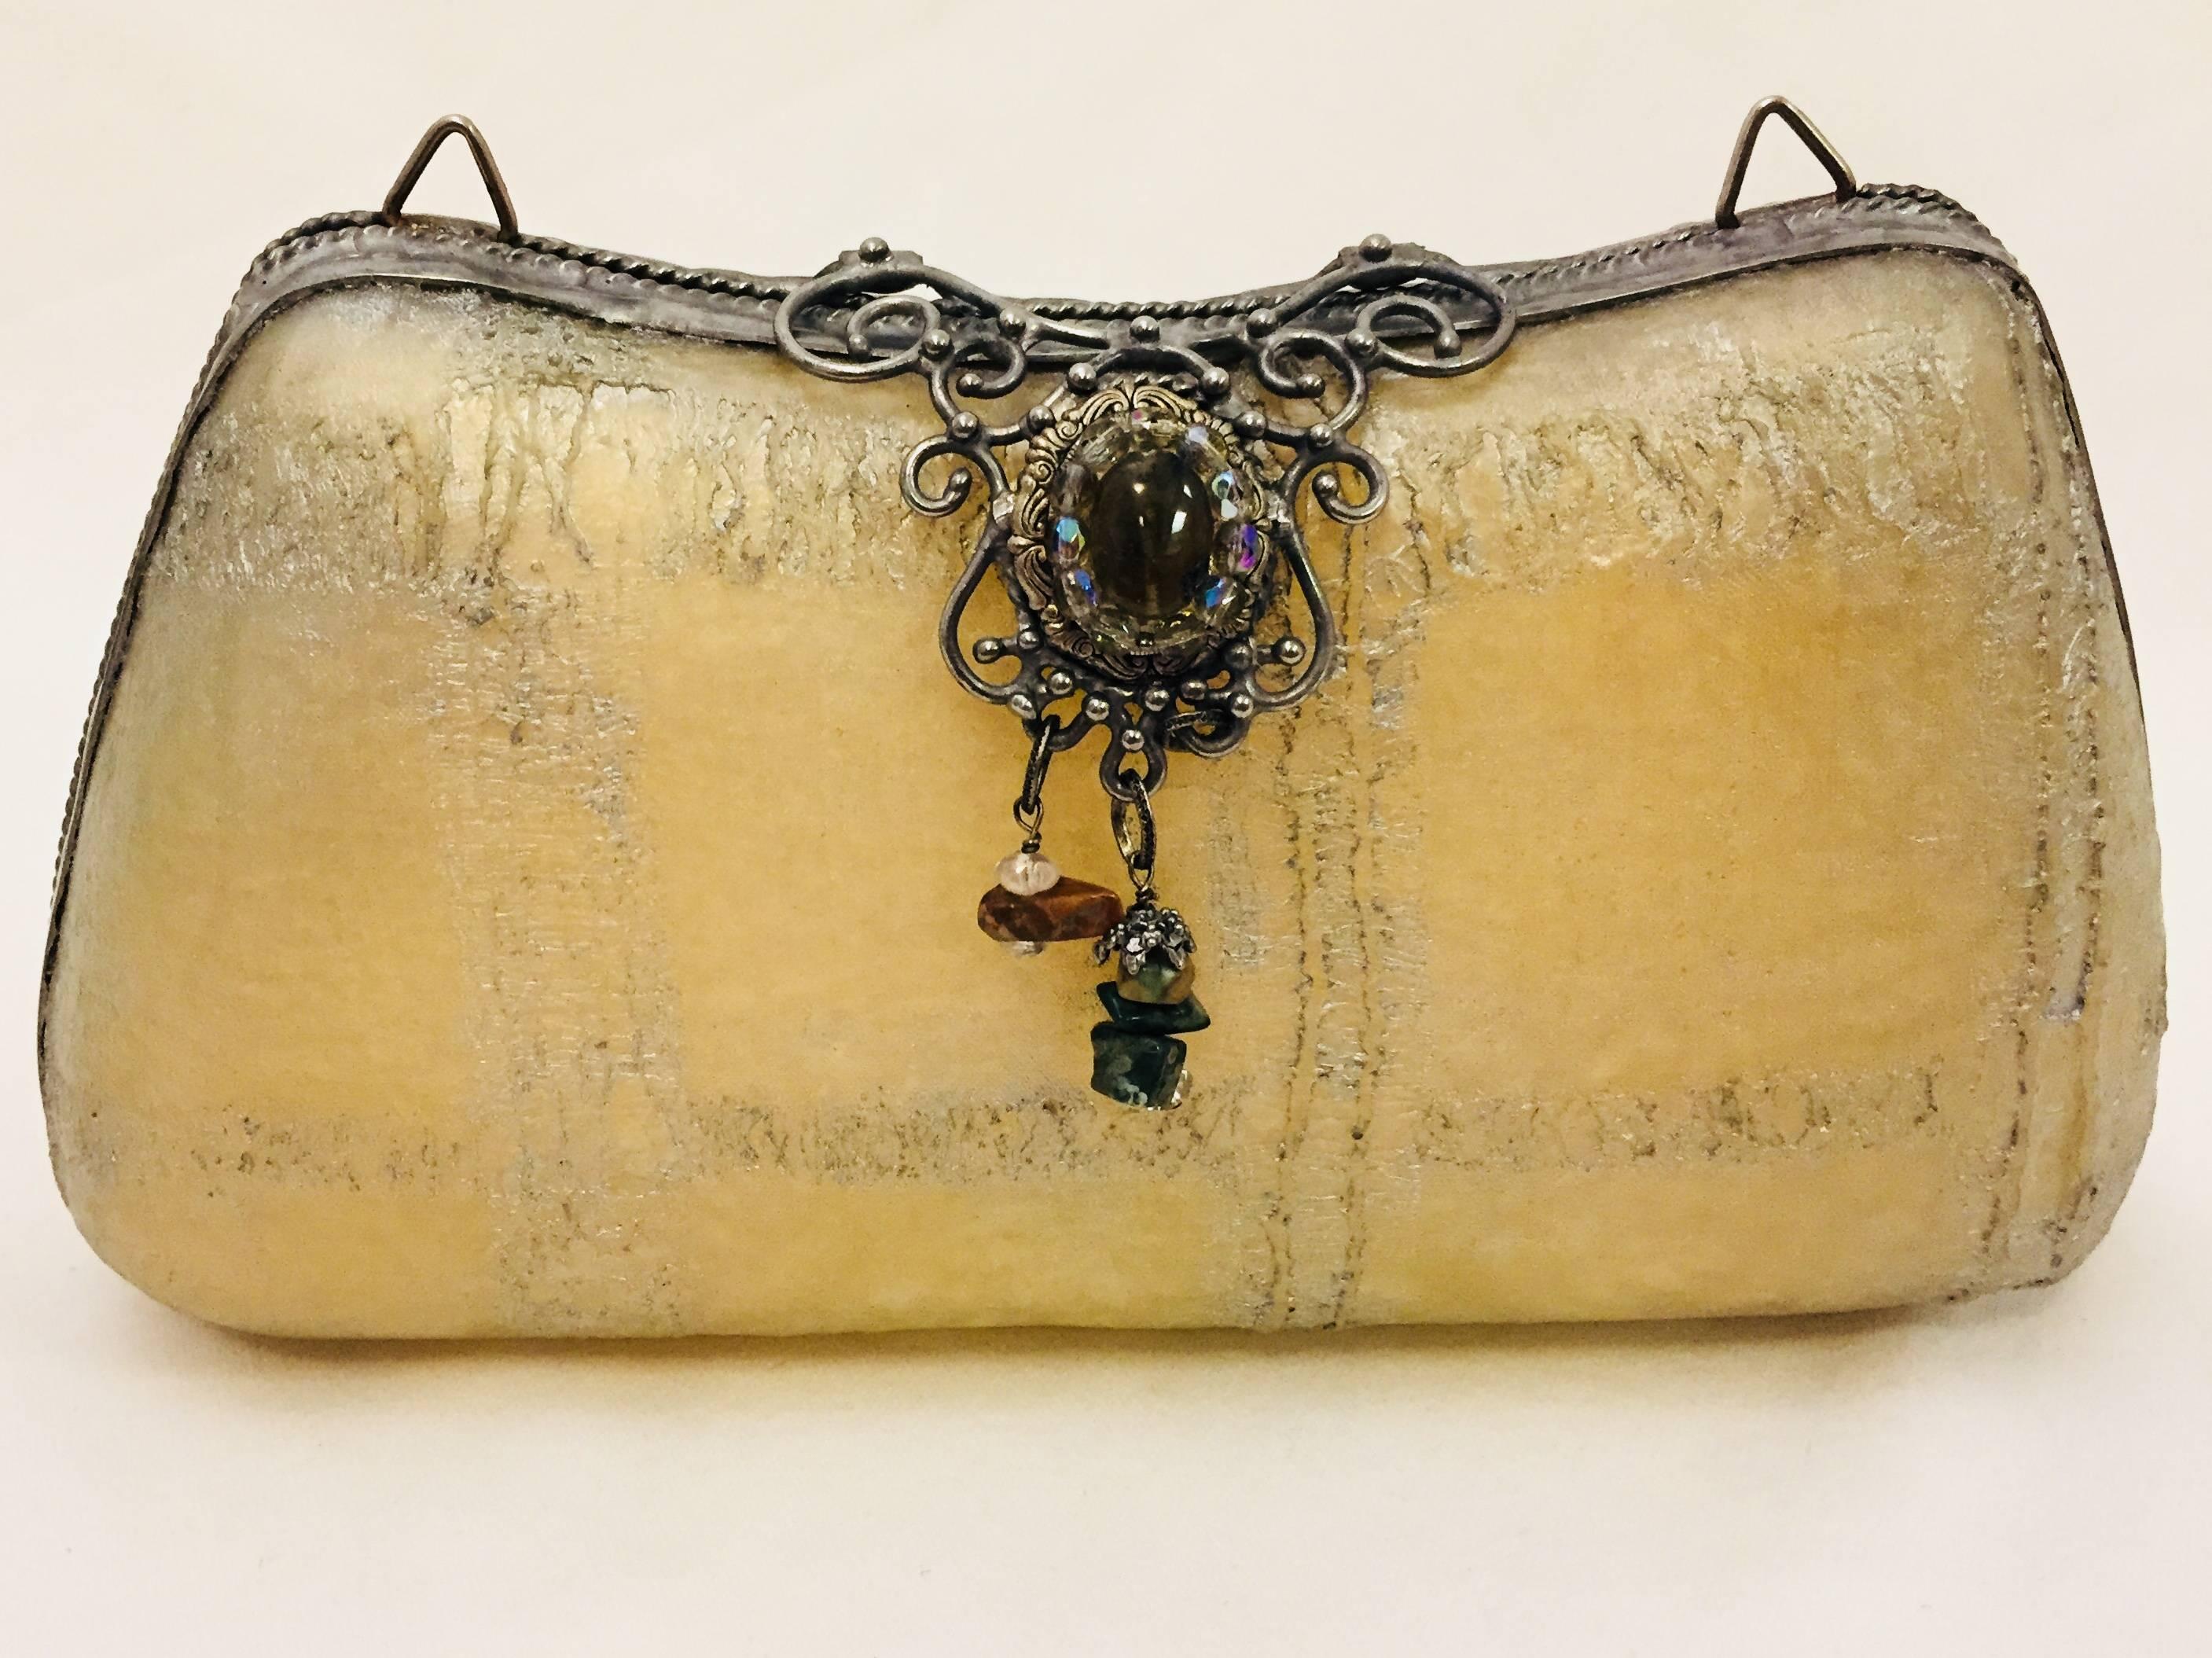 Maya handbags begun in 1985 by her and her daughter with a dream.  Maya highlights sculpted resin echoing natural forms, textures and colors. Coordinating pieces carry a distinctive quality with intermingling elements: semiprecious stones,